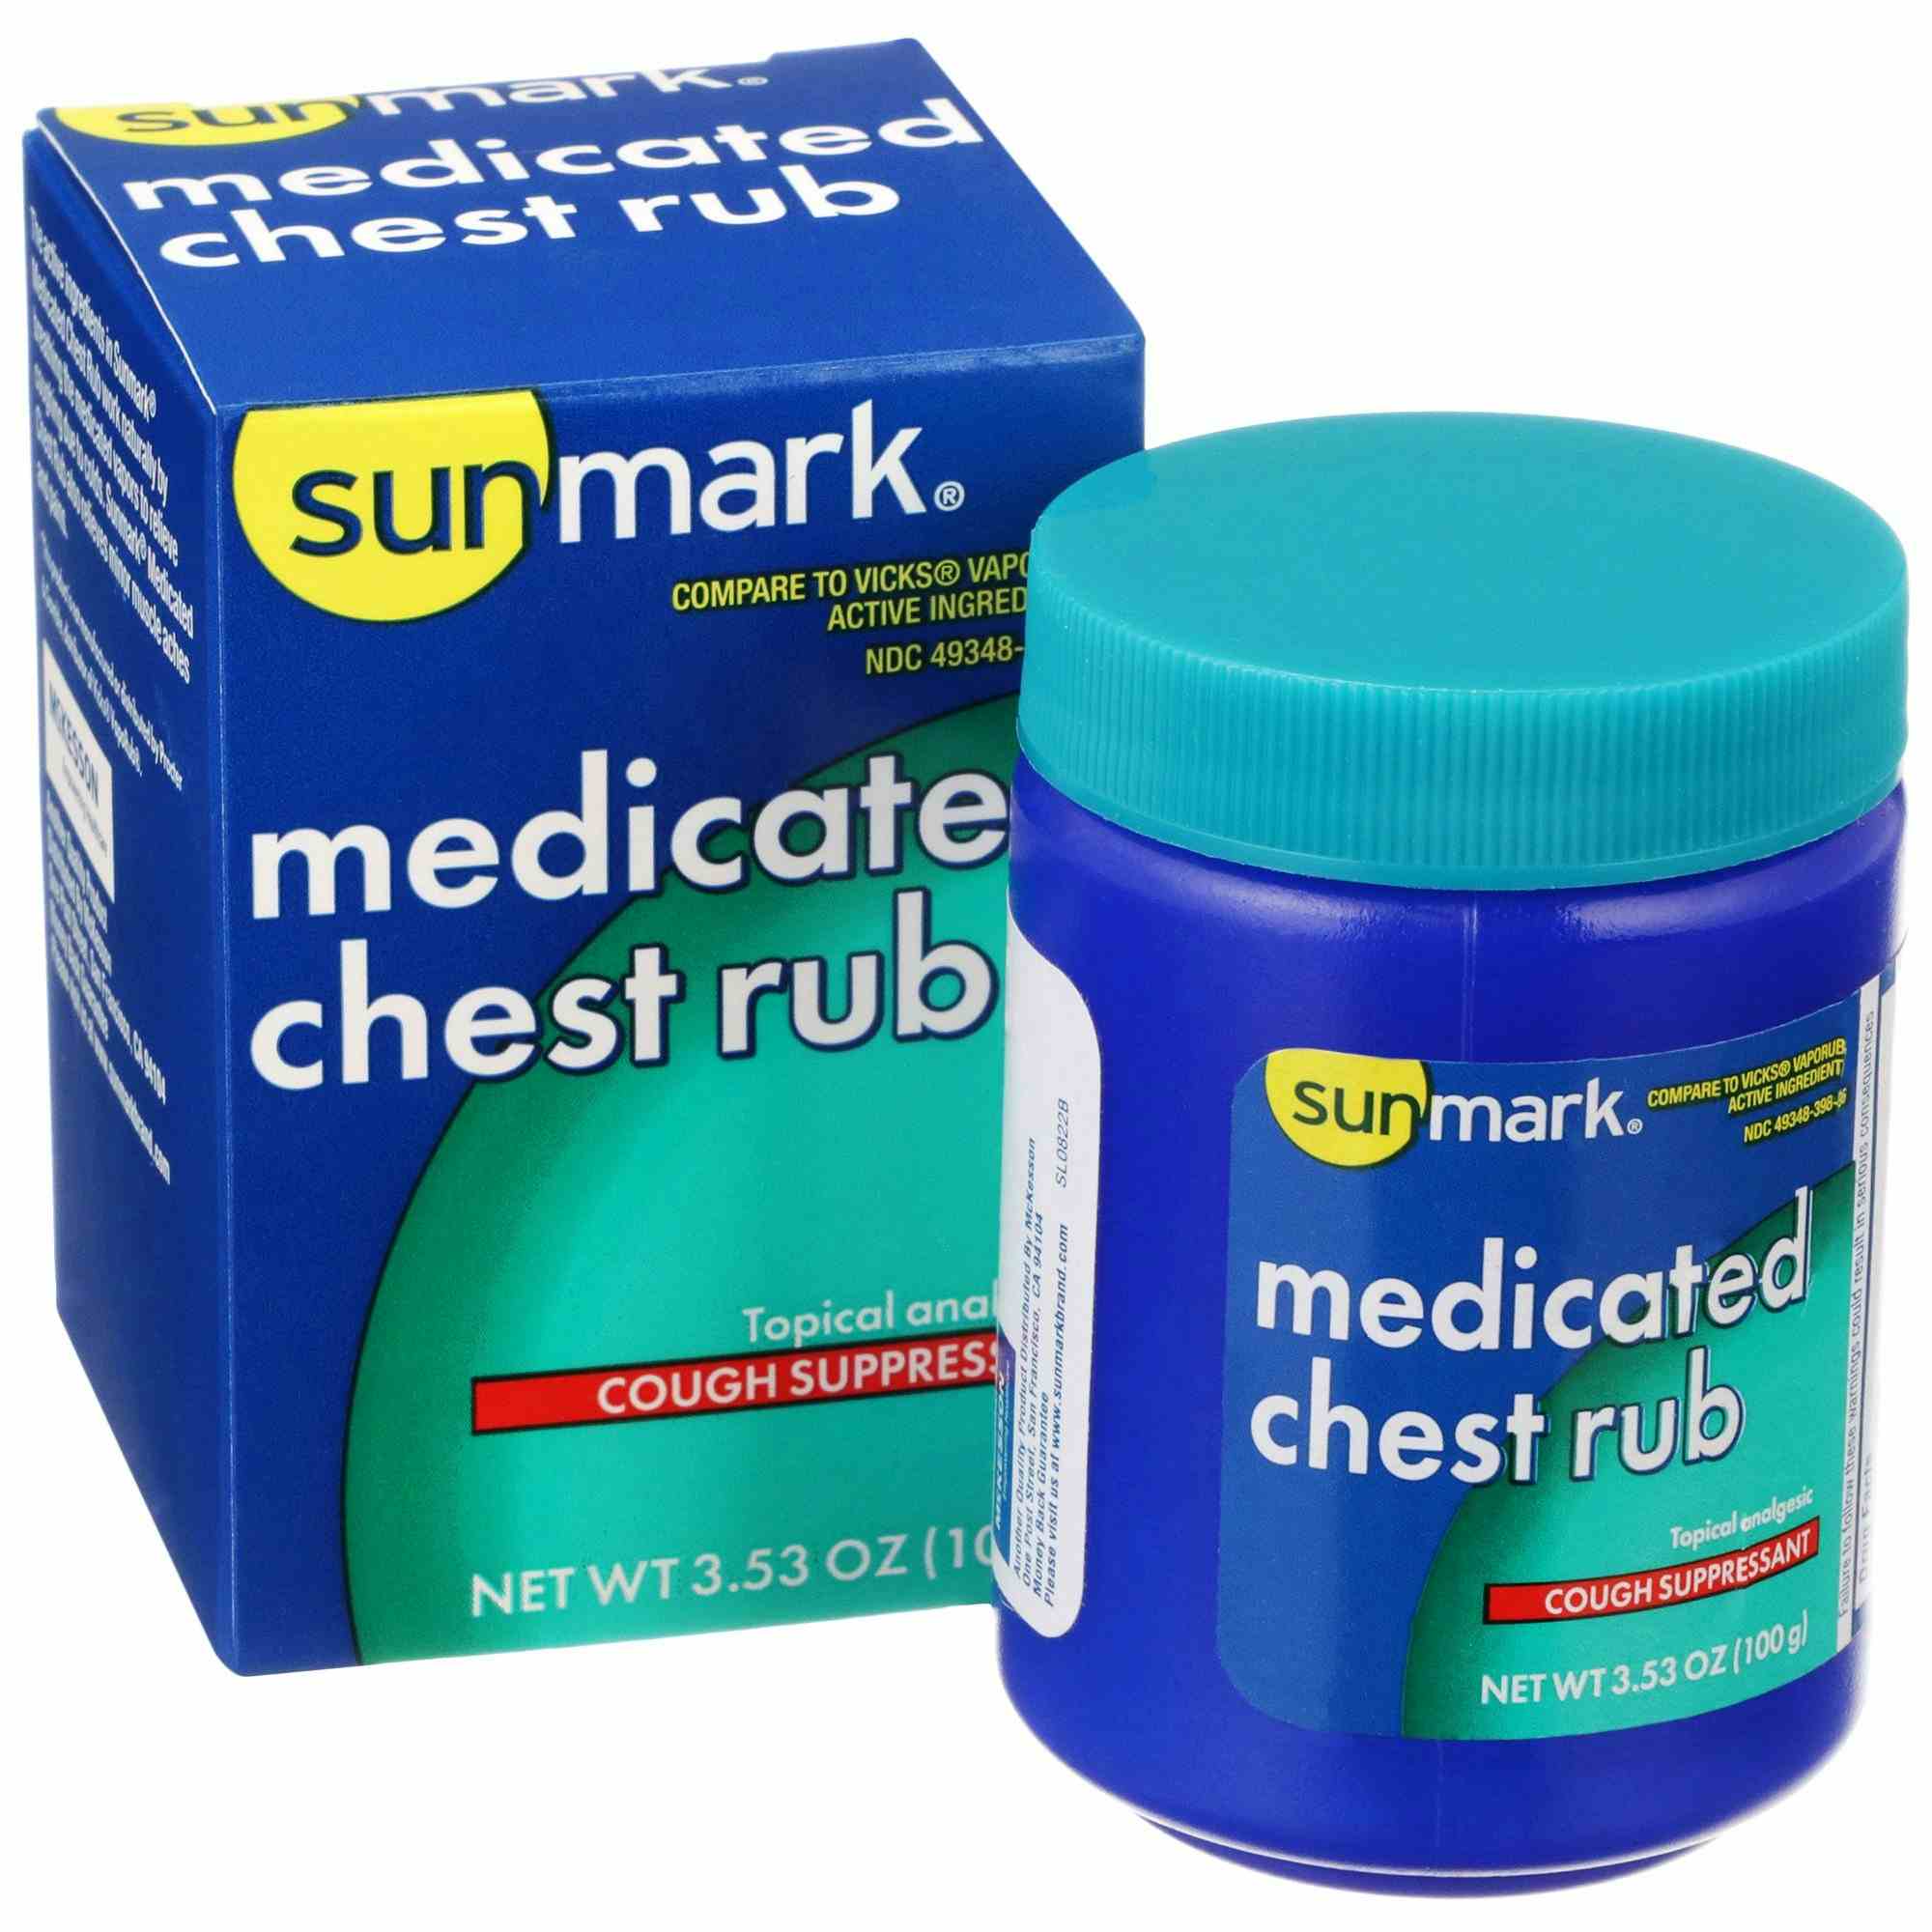 sunmark Medicated Chest Rub Cough Suppressant, 3.5 oz., 49348039896, 1 Each